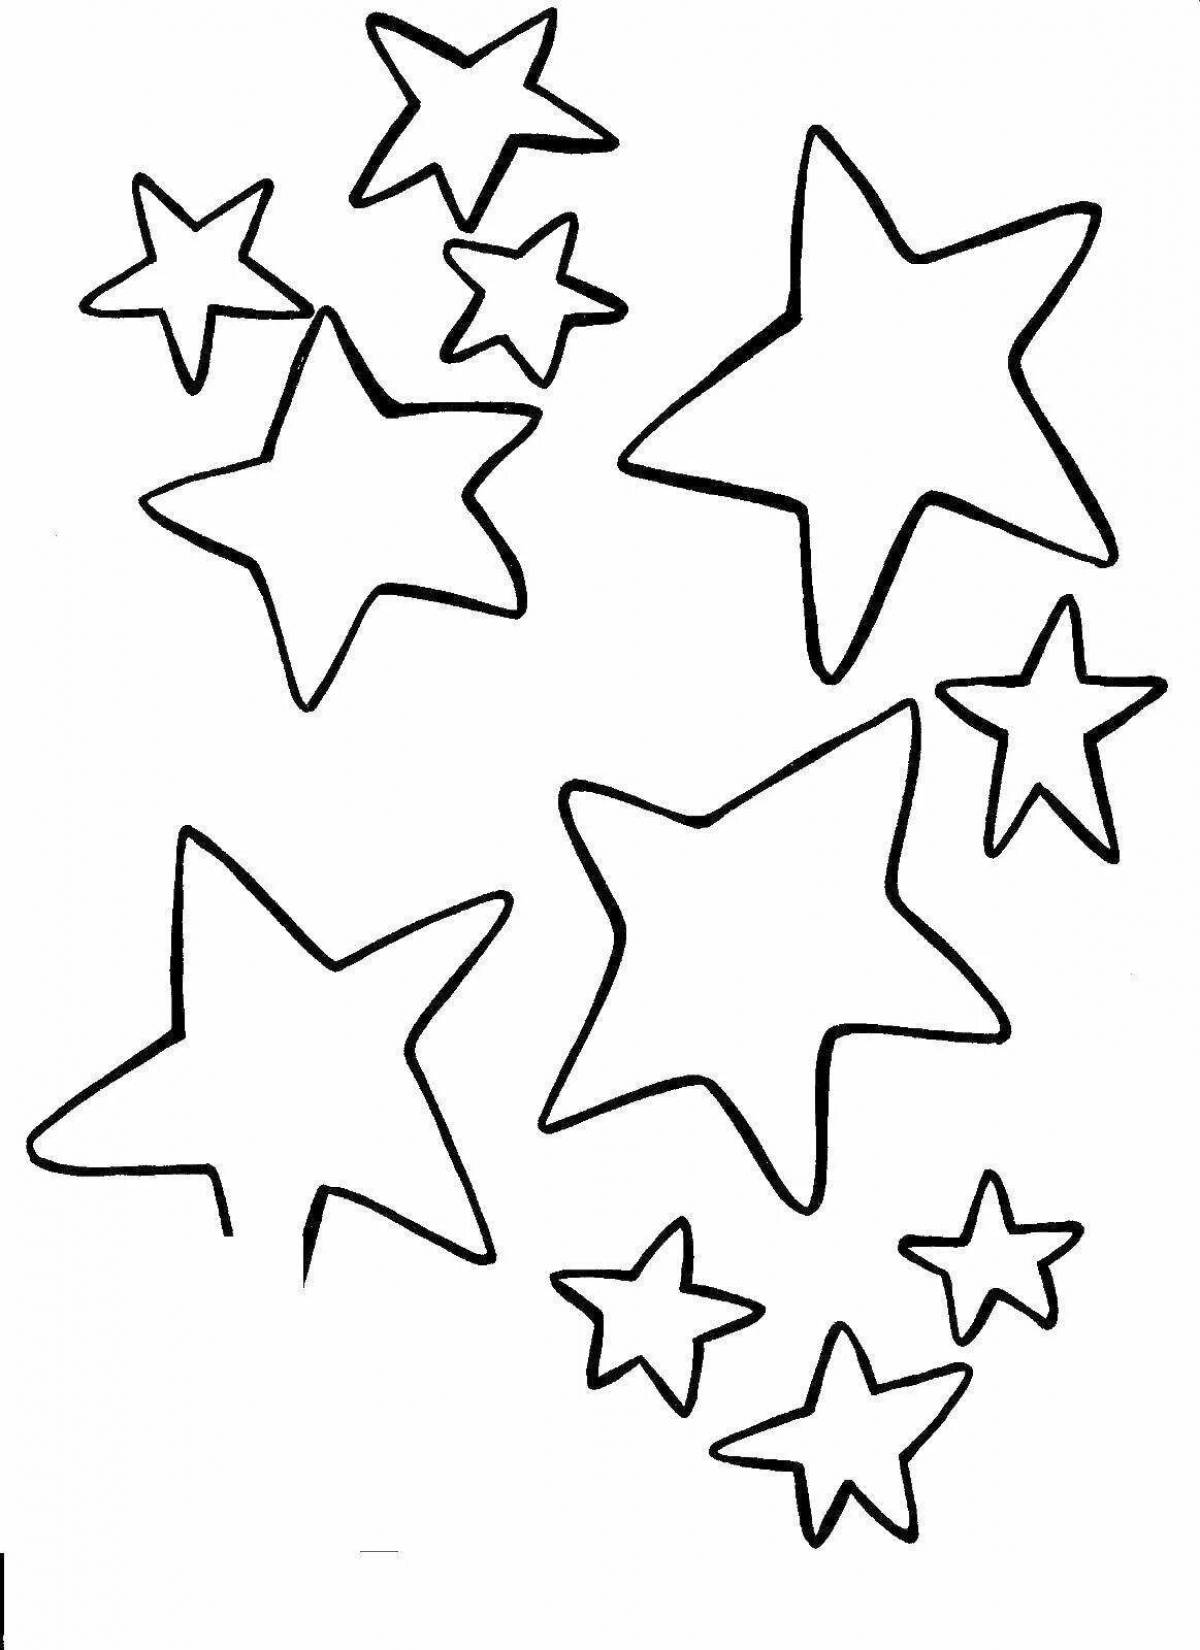 Playful star coloring page for preschoolers